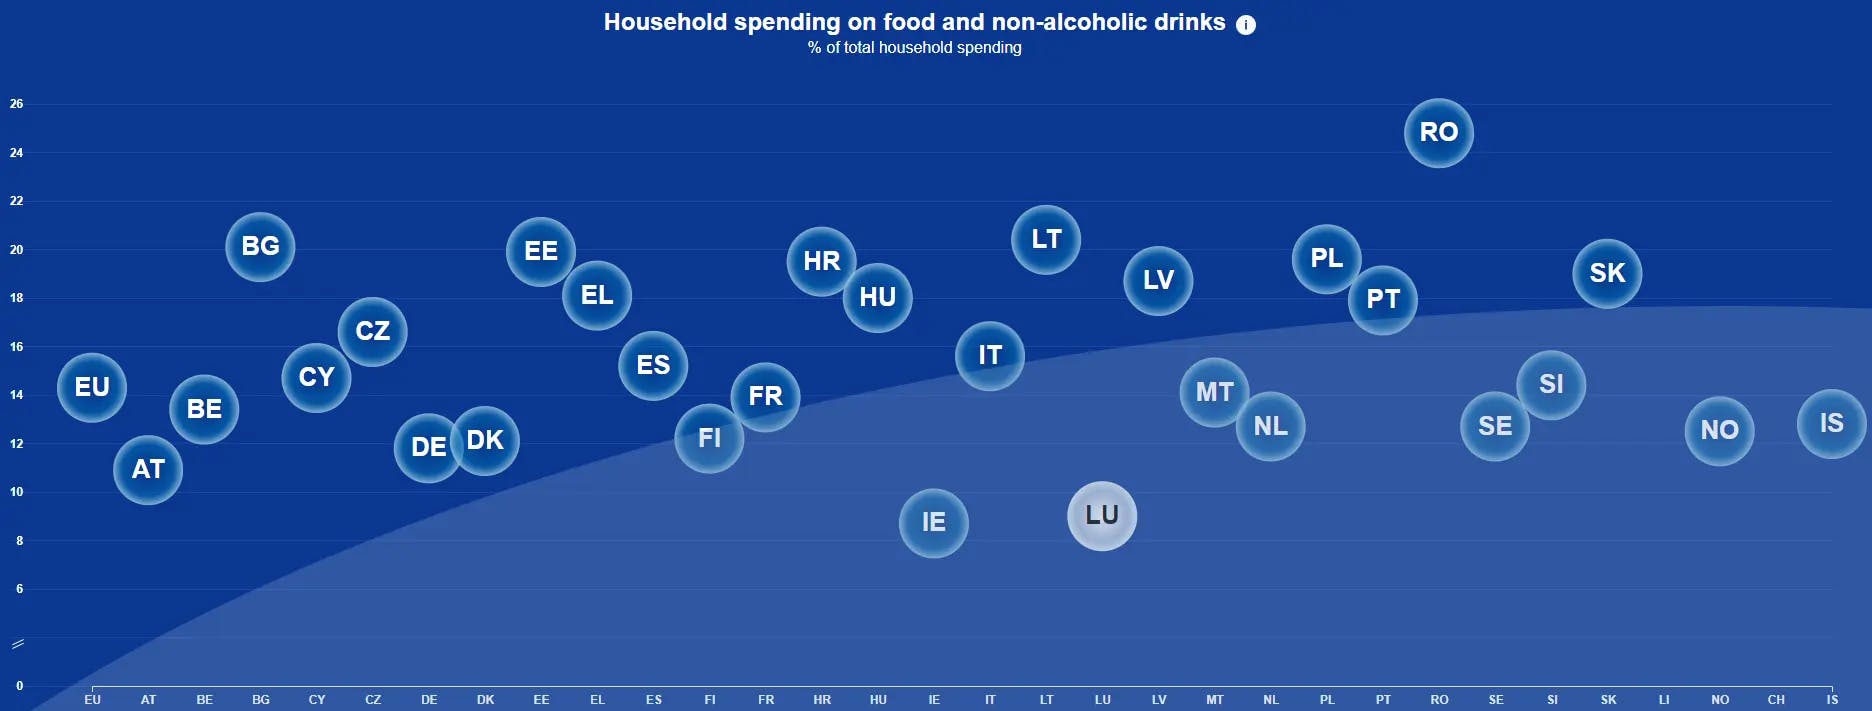 Households spending on food and non-alcoholic drinks in EU